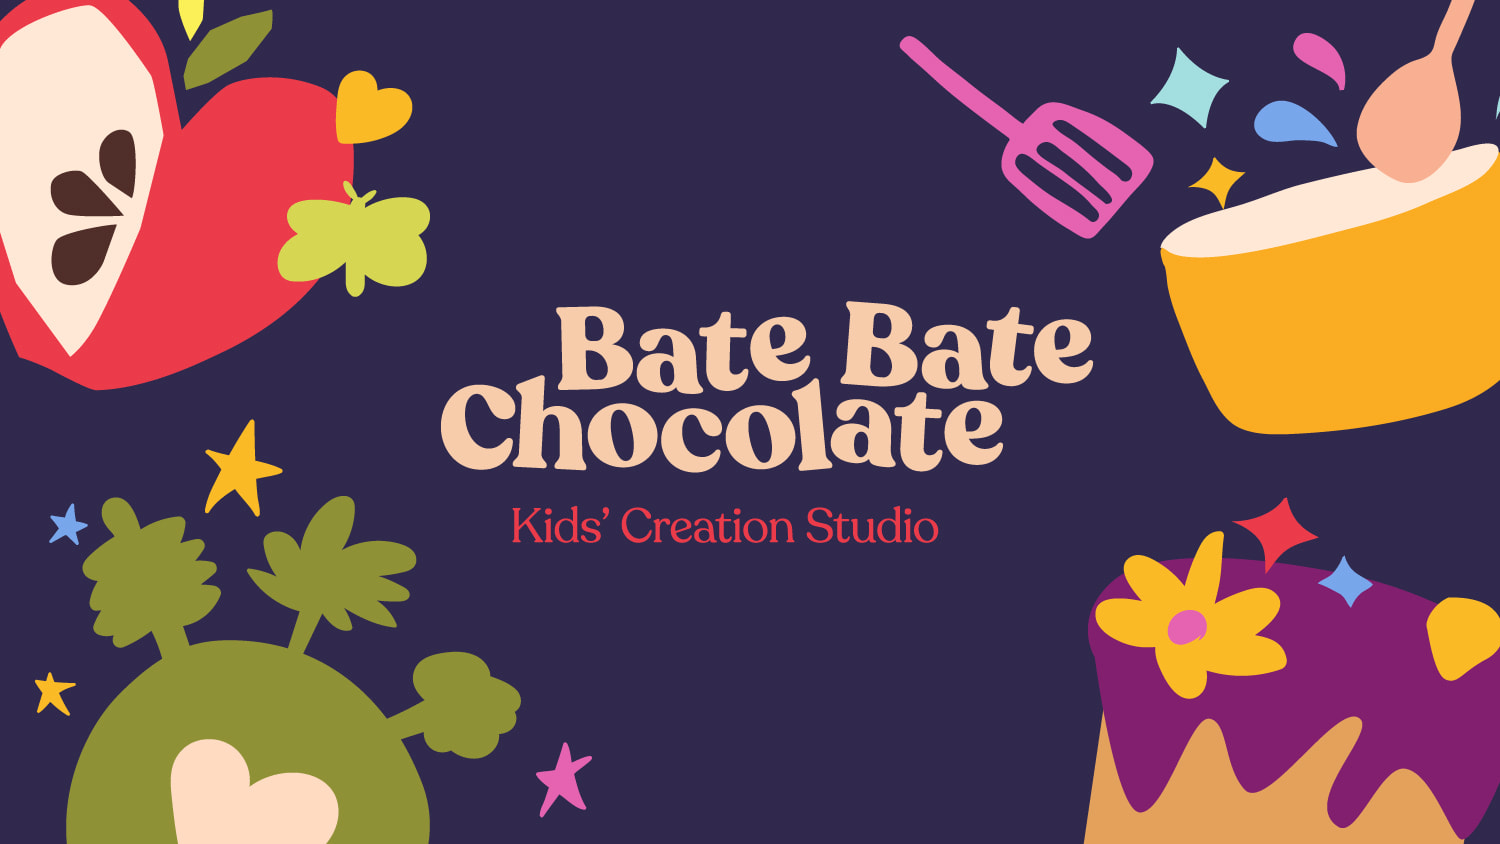 Bate Bate Chocolate fun logotype design with colorful and fun cutout children illustrations around the logo as decoration